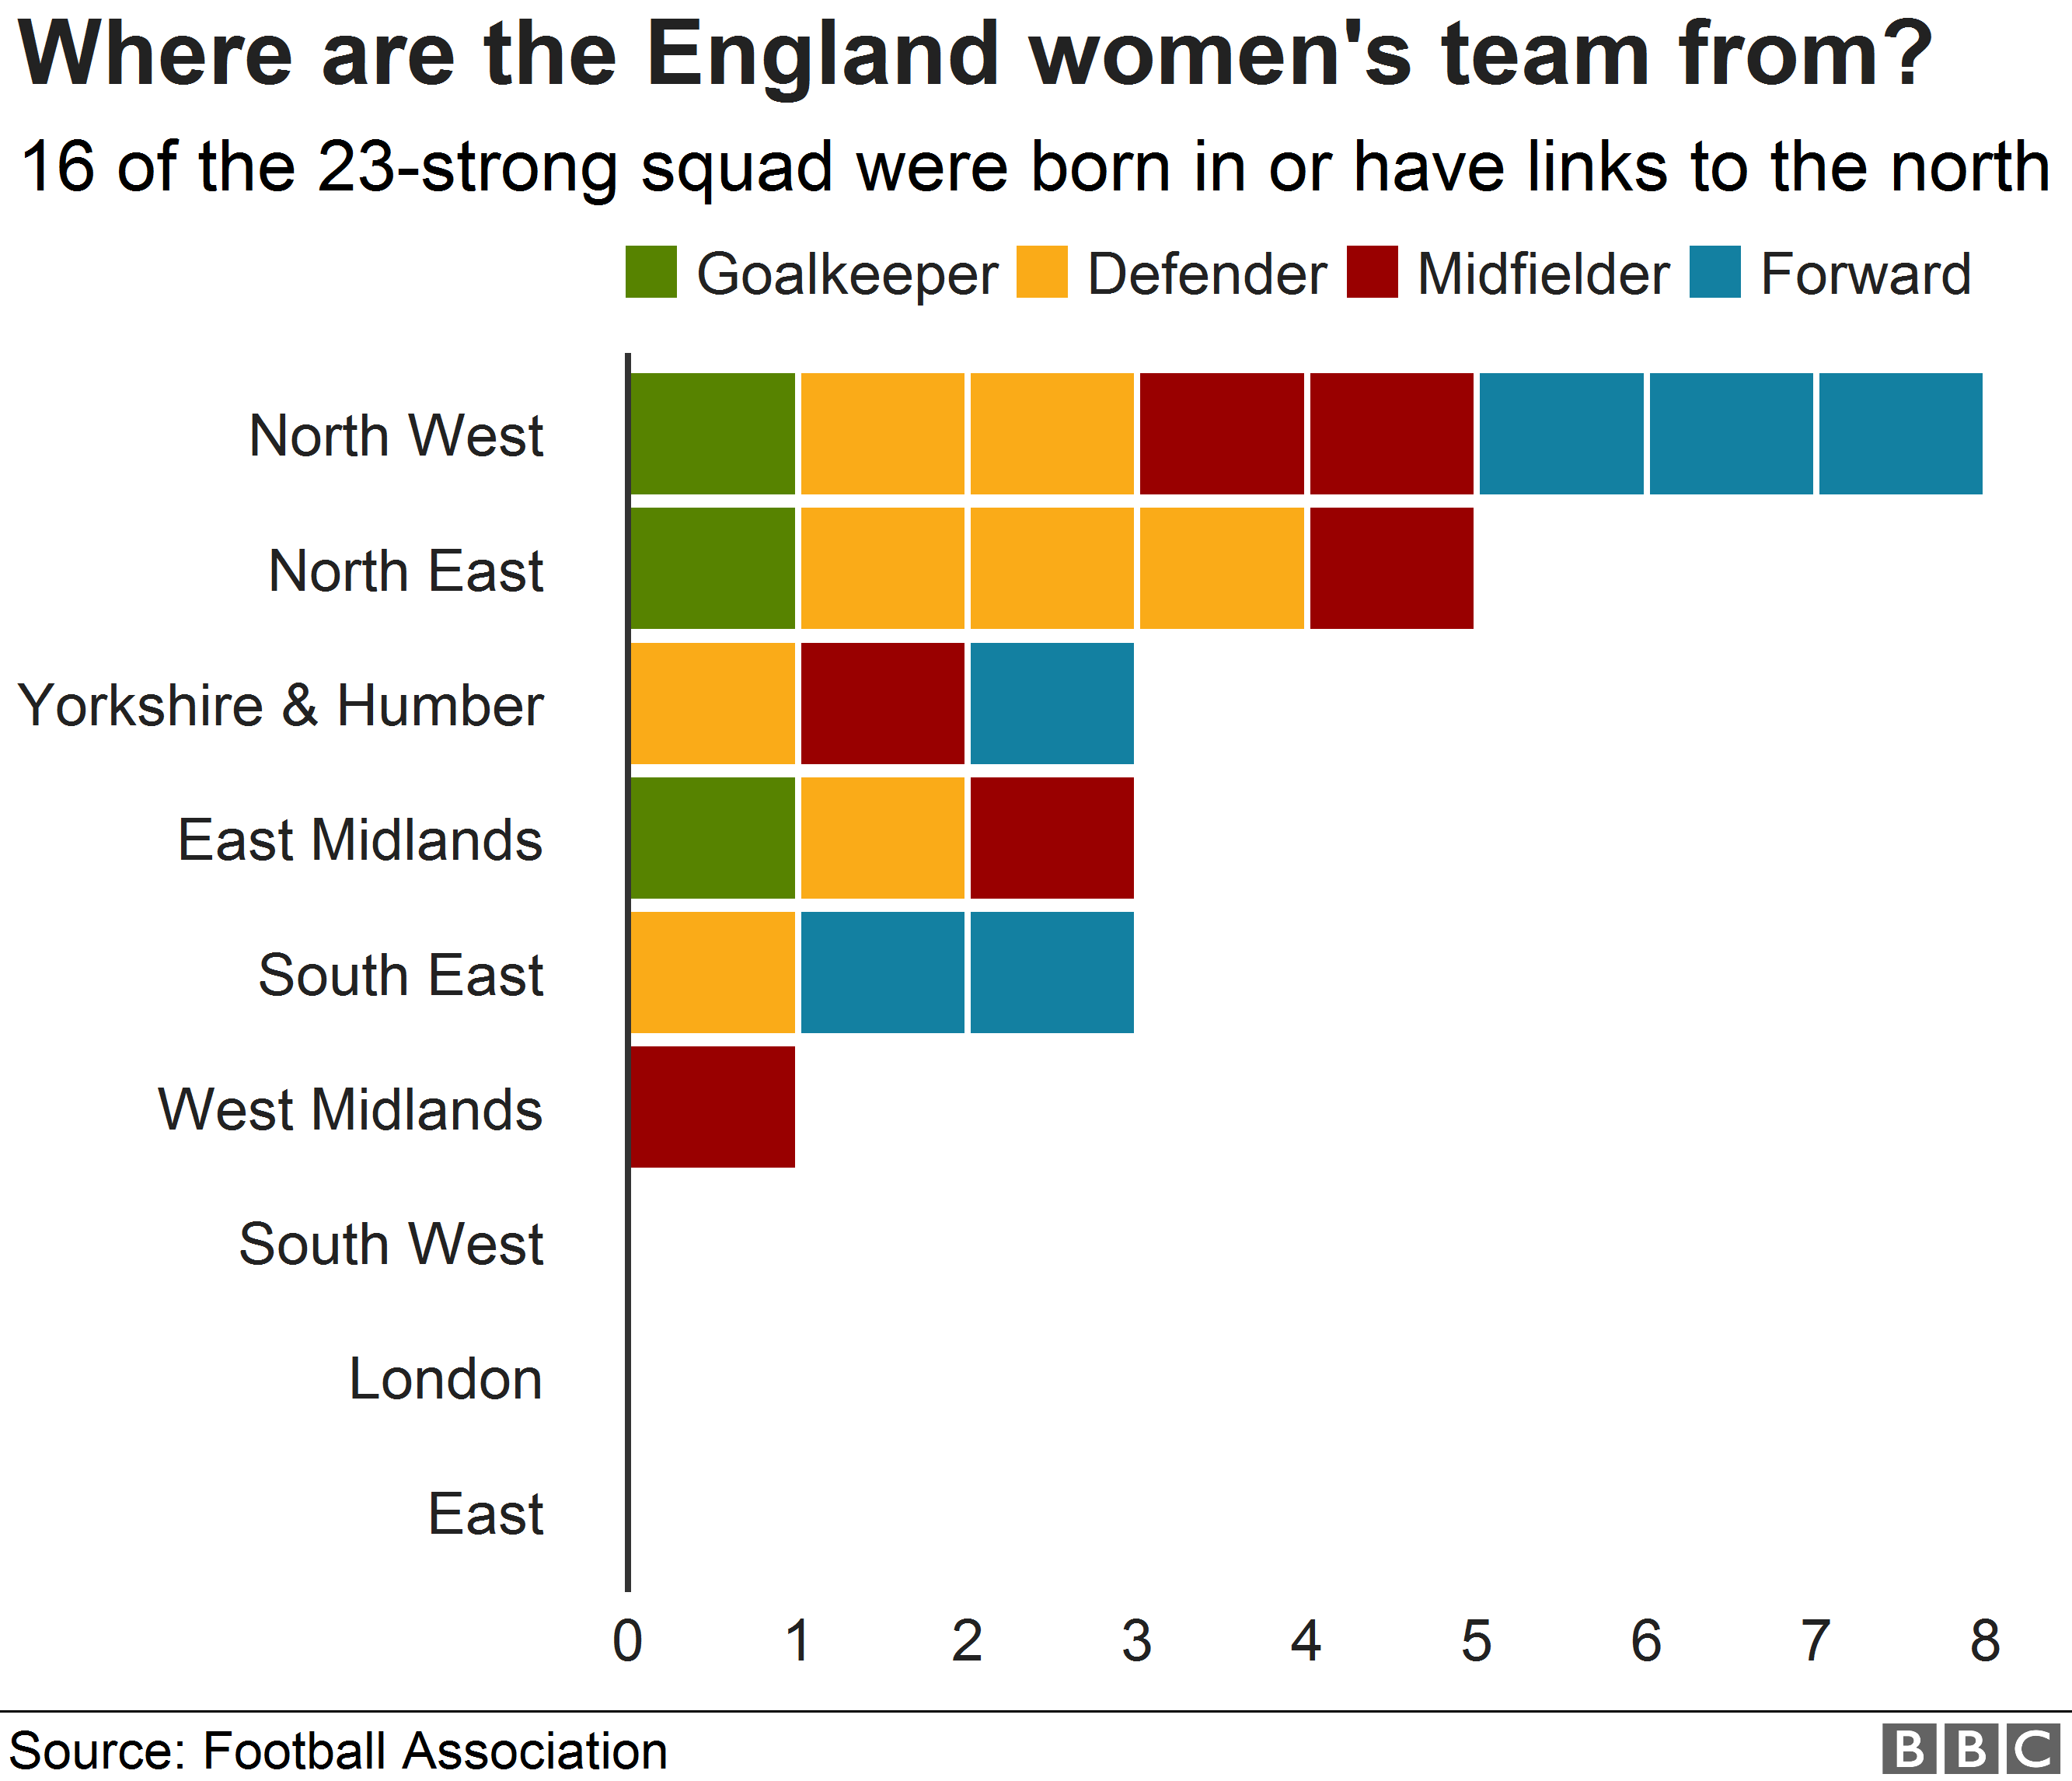 Chart showing where the England women's players are from.